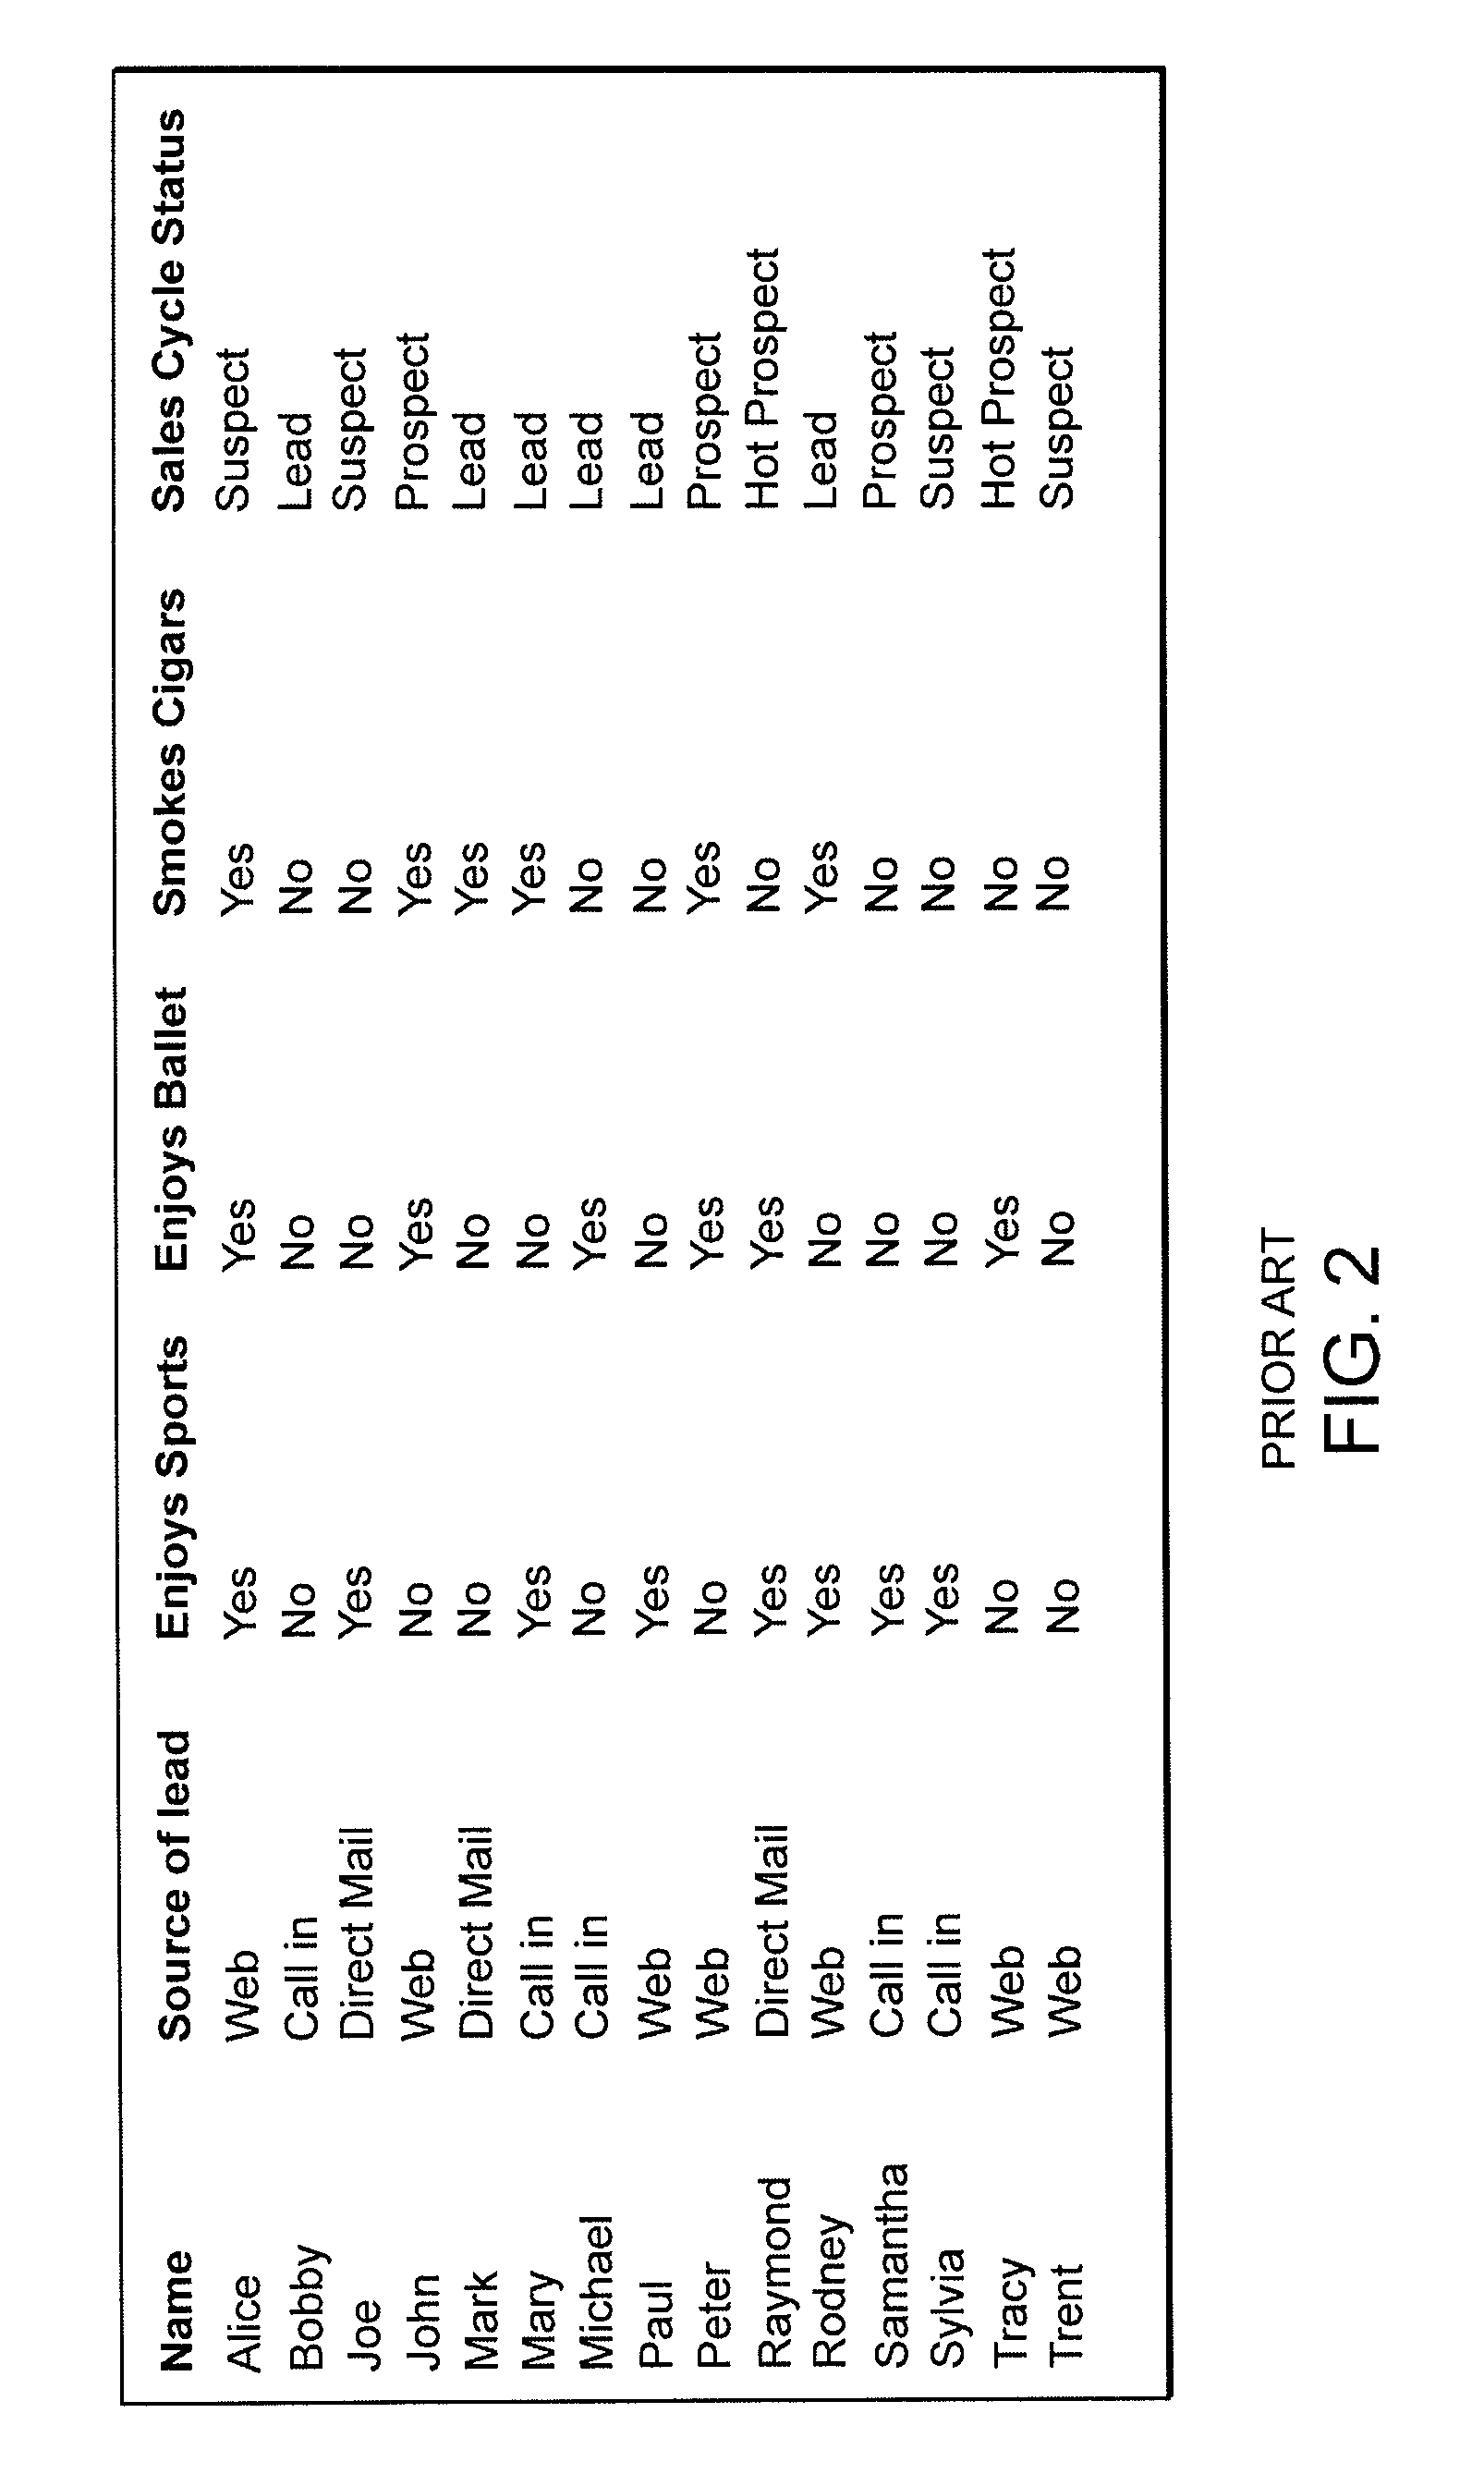 System and Method for Dynamic Management of Business Processes